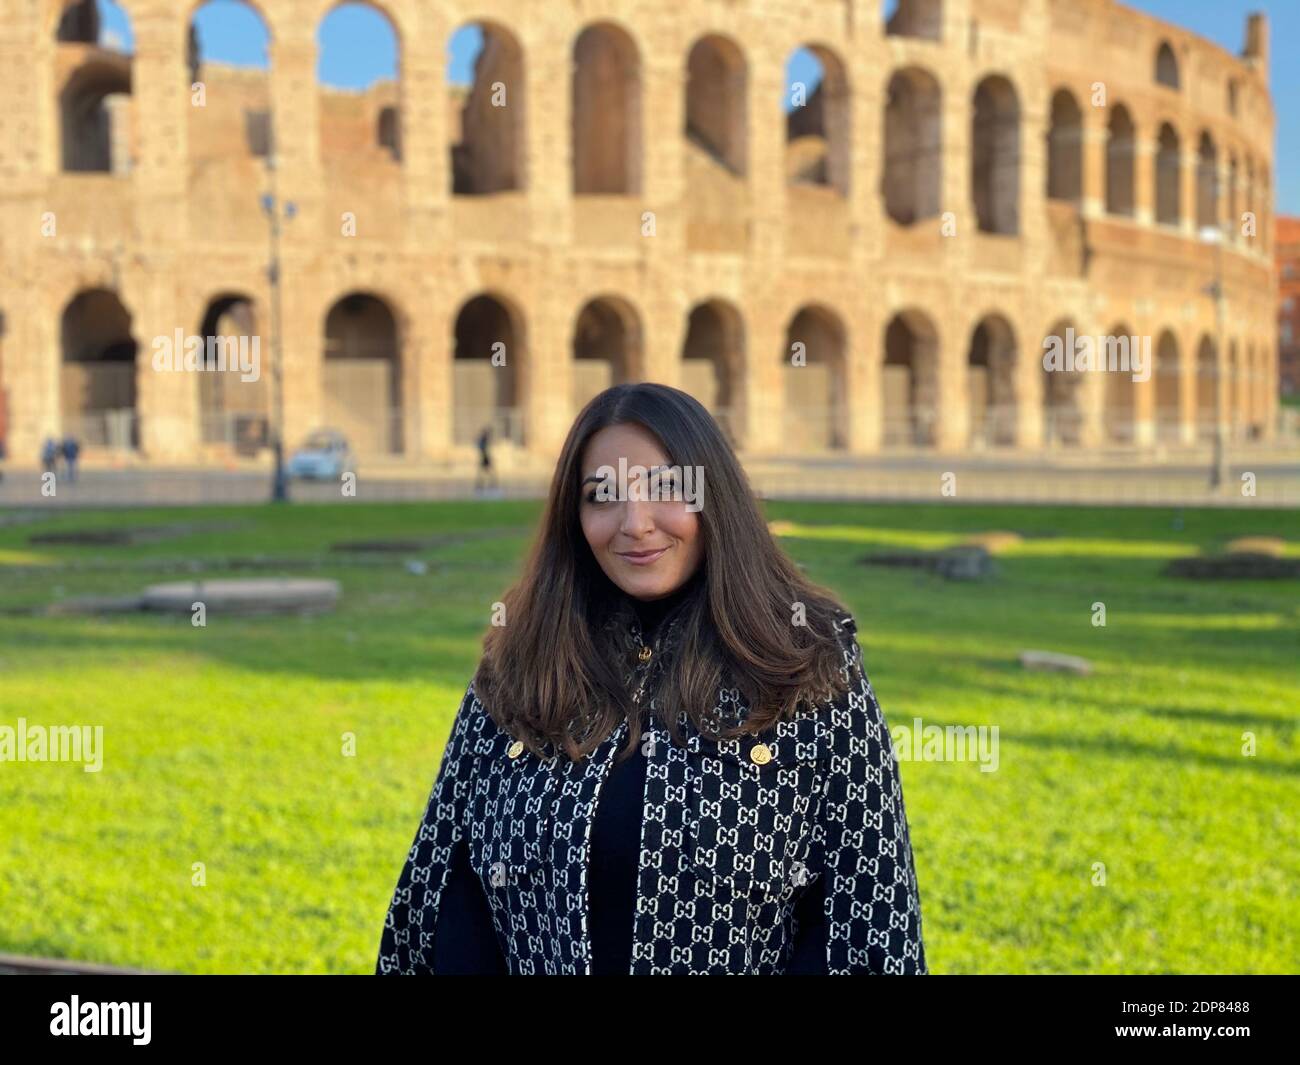 Rome, Italy. 16th Dec, 2020. Veteran tour guide Elisa Valeria Bove poses for a photo at the Colosseum in Rome, Italy, Dec. 16, 2020. TO GO WITH 'Feature: Veteran tour guide bets big on recovery of Italy's tourism sector despite coronavirus impact' Credit: Franco Bizzantino/Xinhua/Alamy Live News Stock Photo